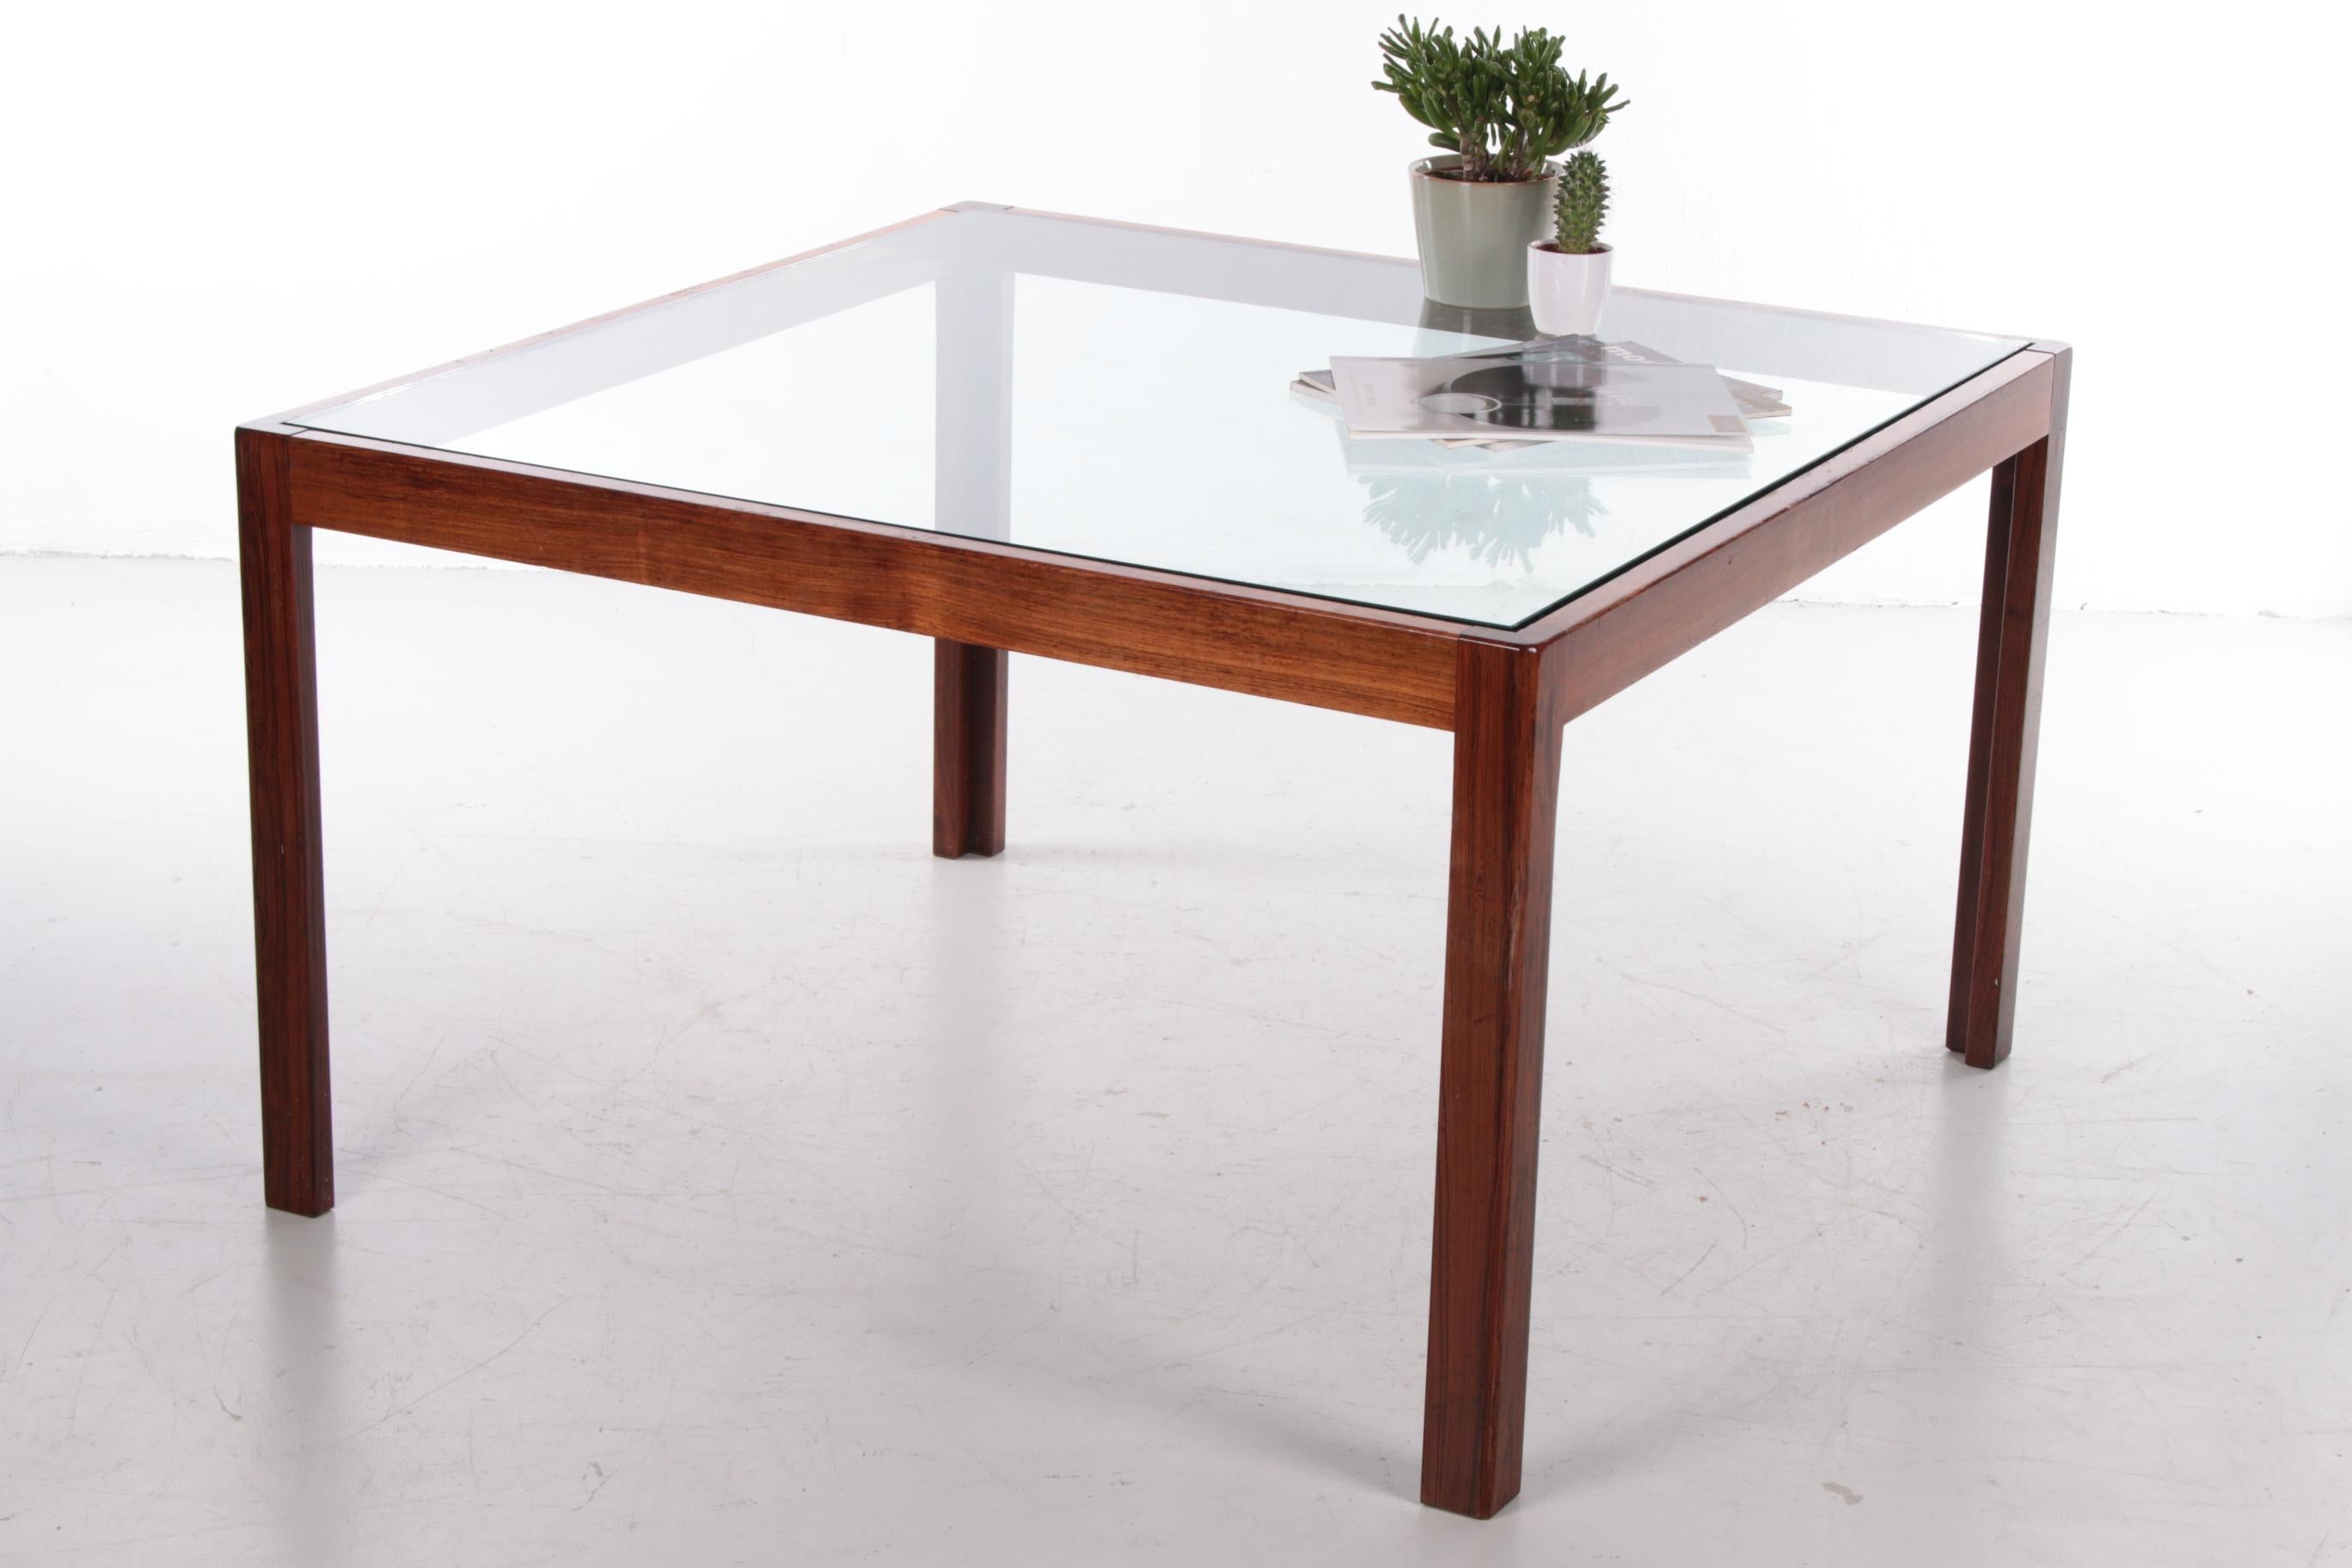 A beautiful square coffee table with a Wood frame and an inlaid glass top. 

The simple design points to typical Danish design, probably produced around the 1960s.

You can combine this table with various interior styles. 

The sleek design and the